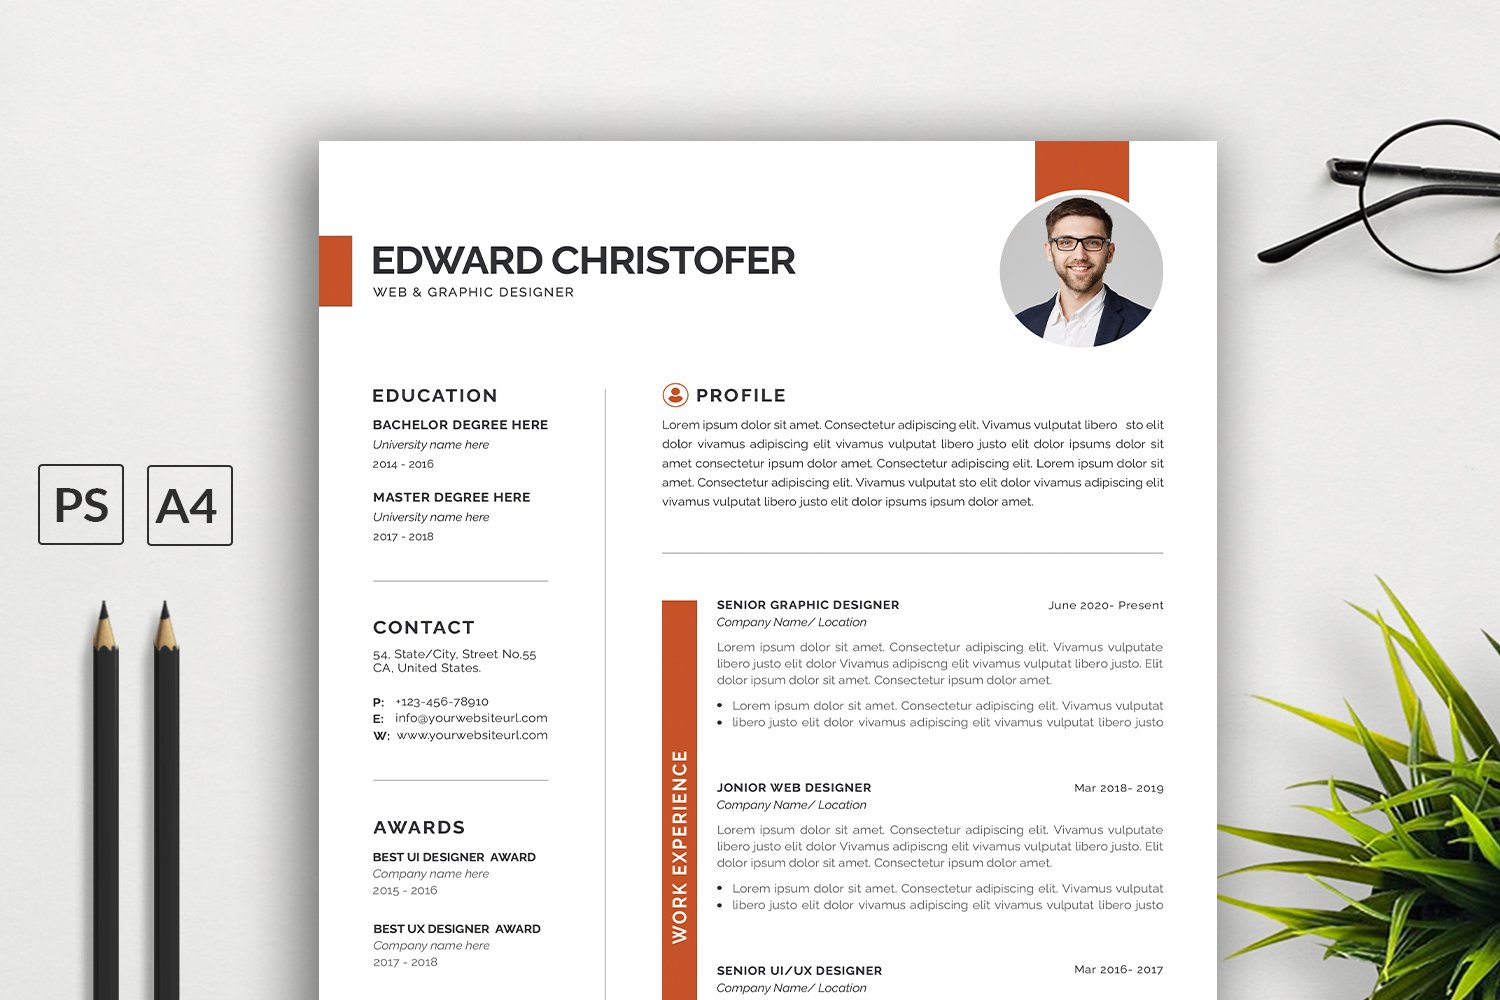 Newspaper Style Resume Template, Print Templates ft. resume & letter -  Envato Elements